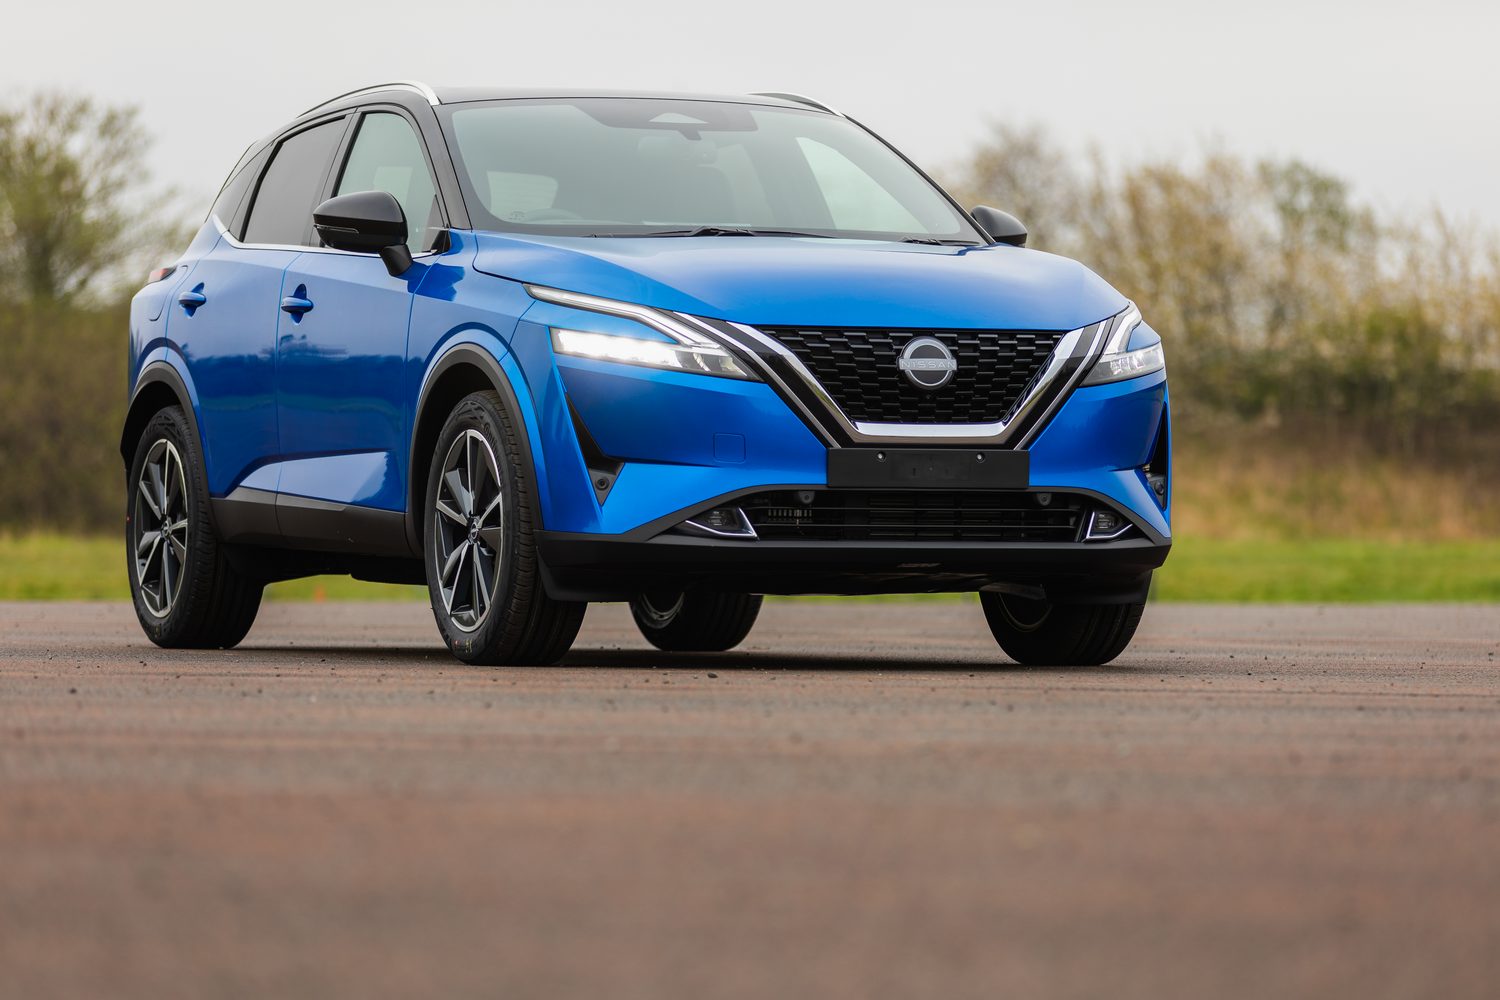 Car News | Updated Nissan Qashqai on sale from €34,600 | CompleteCar.ie